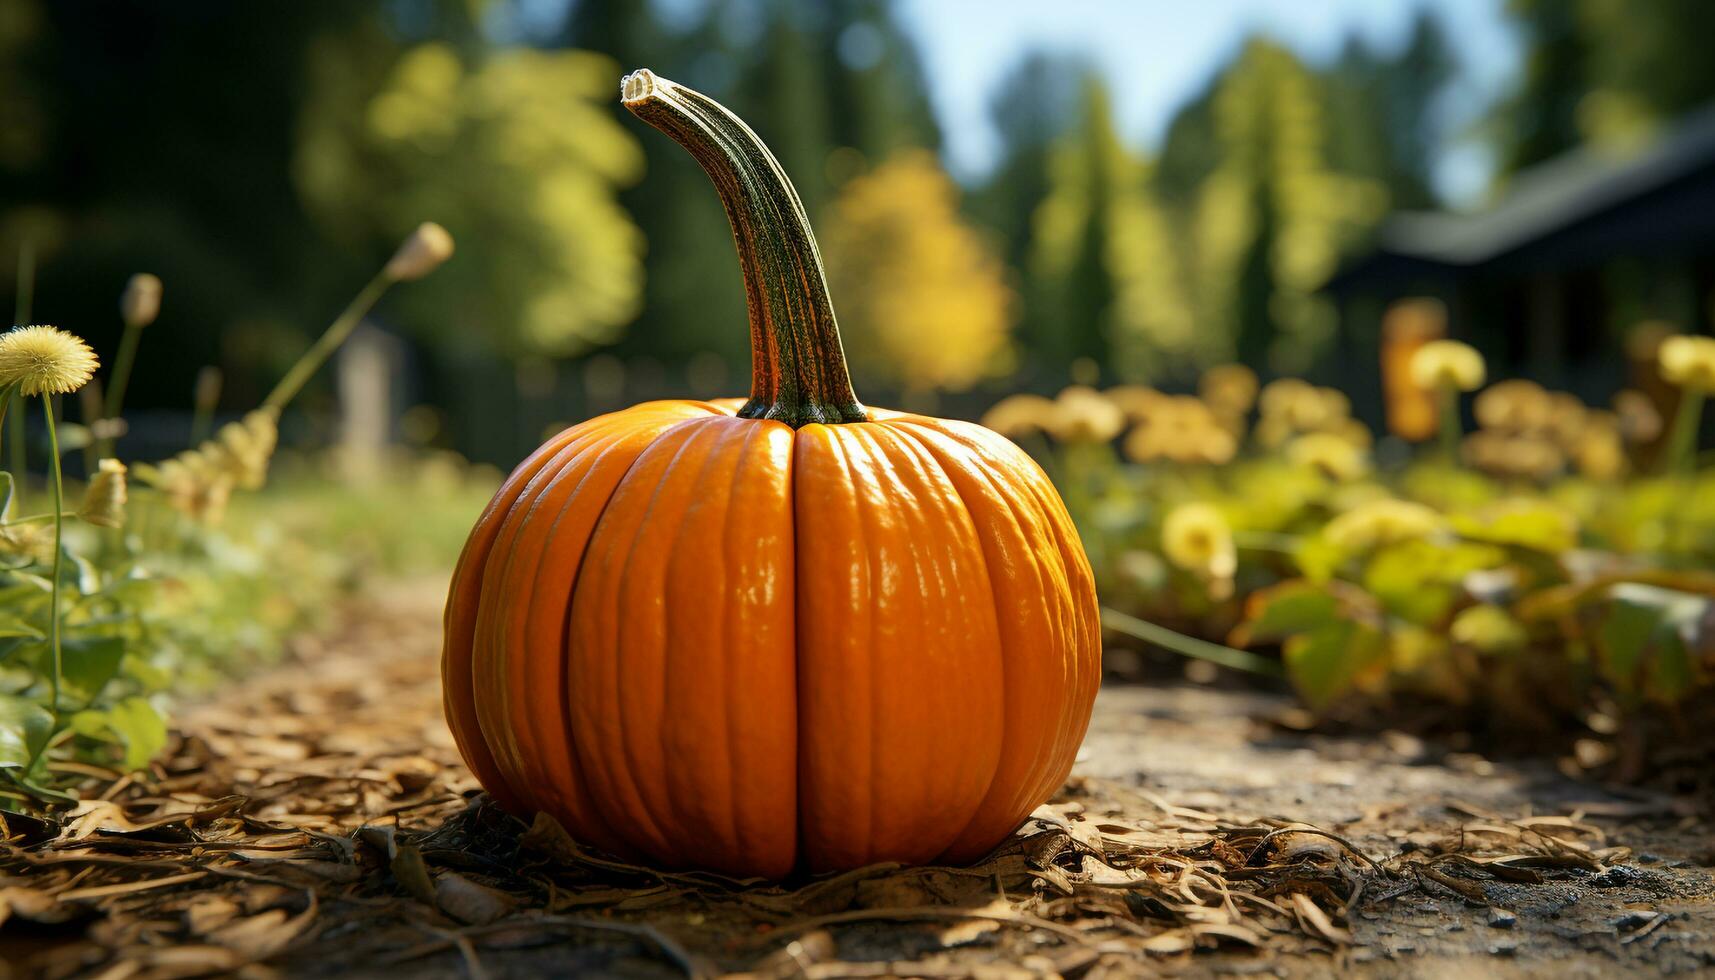 Pumpkin, autumn, Halloween, nature, October, season, vegetable, agriculture, leaf, farm generated by AI photo